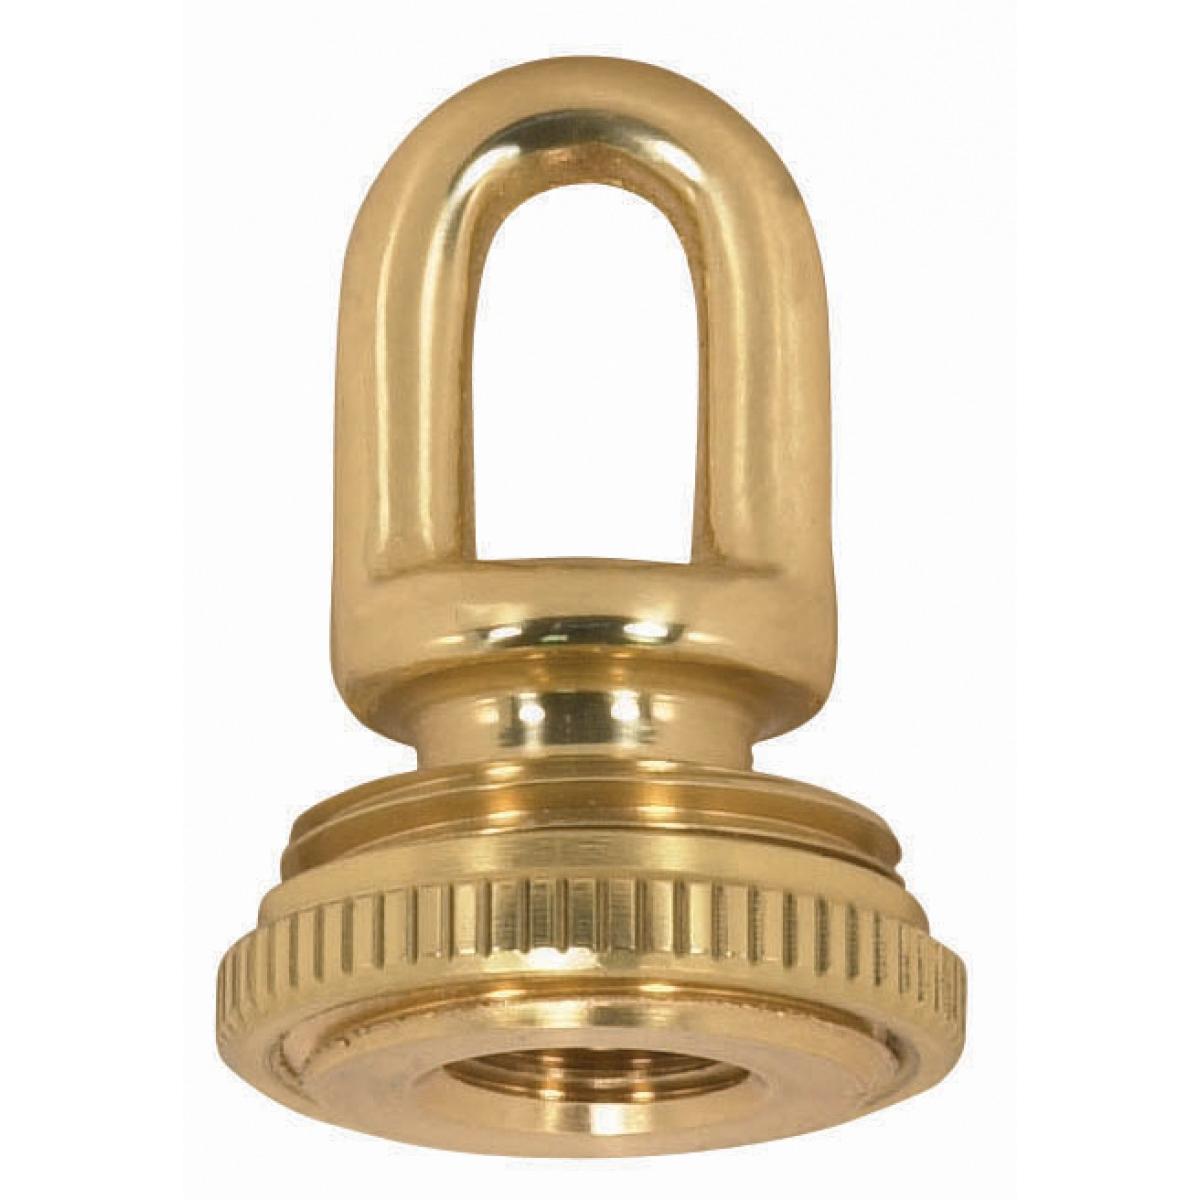 Satco 90-1572 1/4 IP Cast Brass Screw Collar Loops with Ring 1/4 IP Fits 1" Canopy Hole Ring